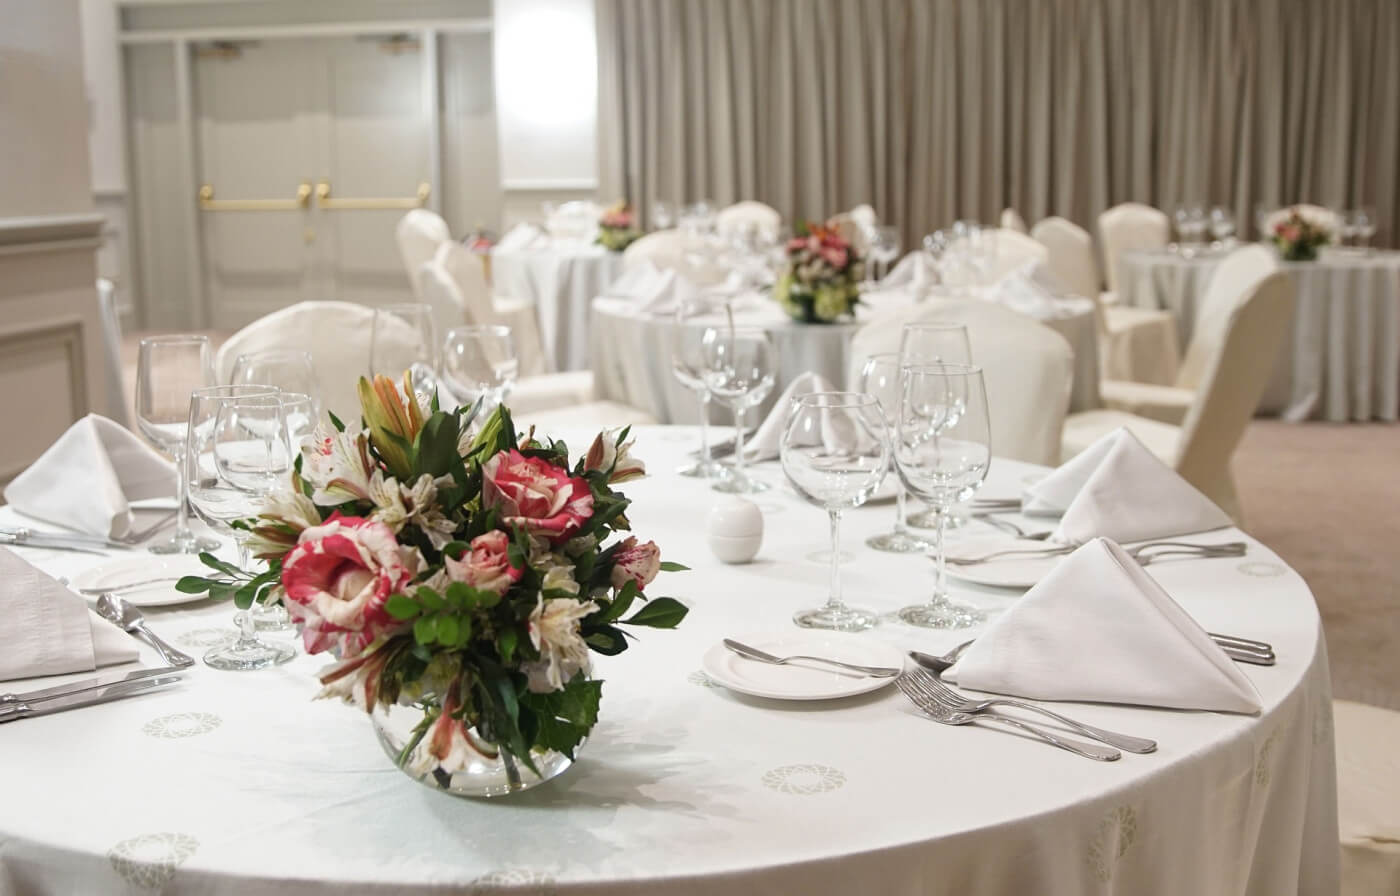 Reasons To Use Milliken Table Linens